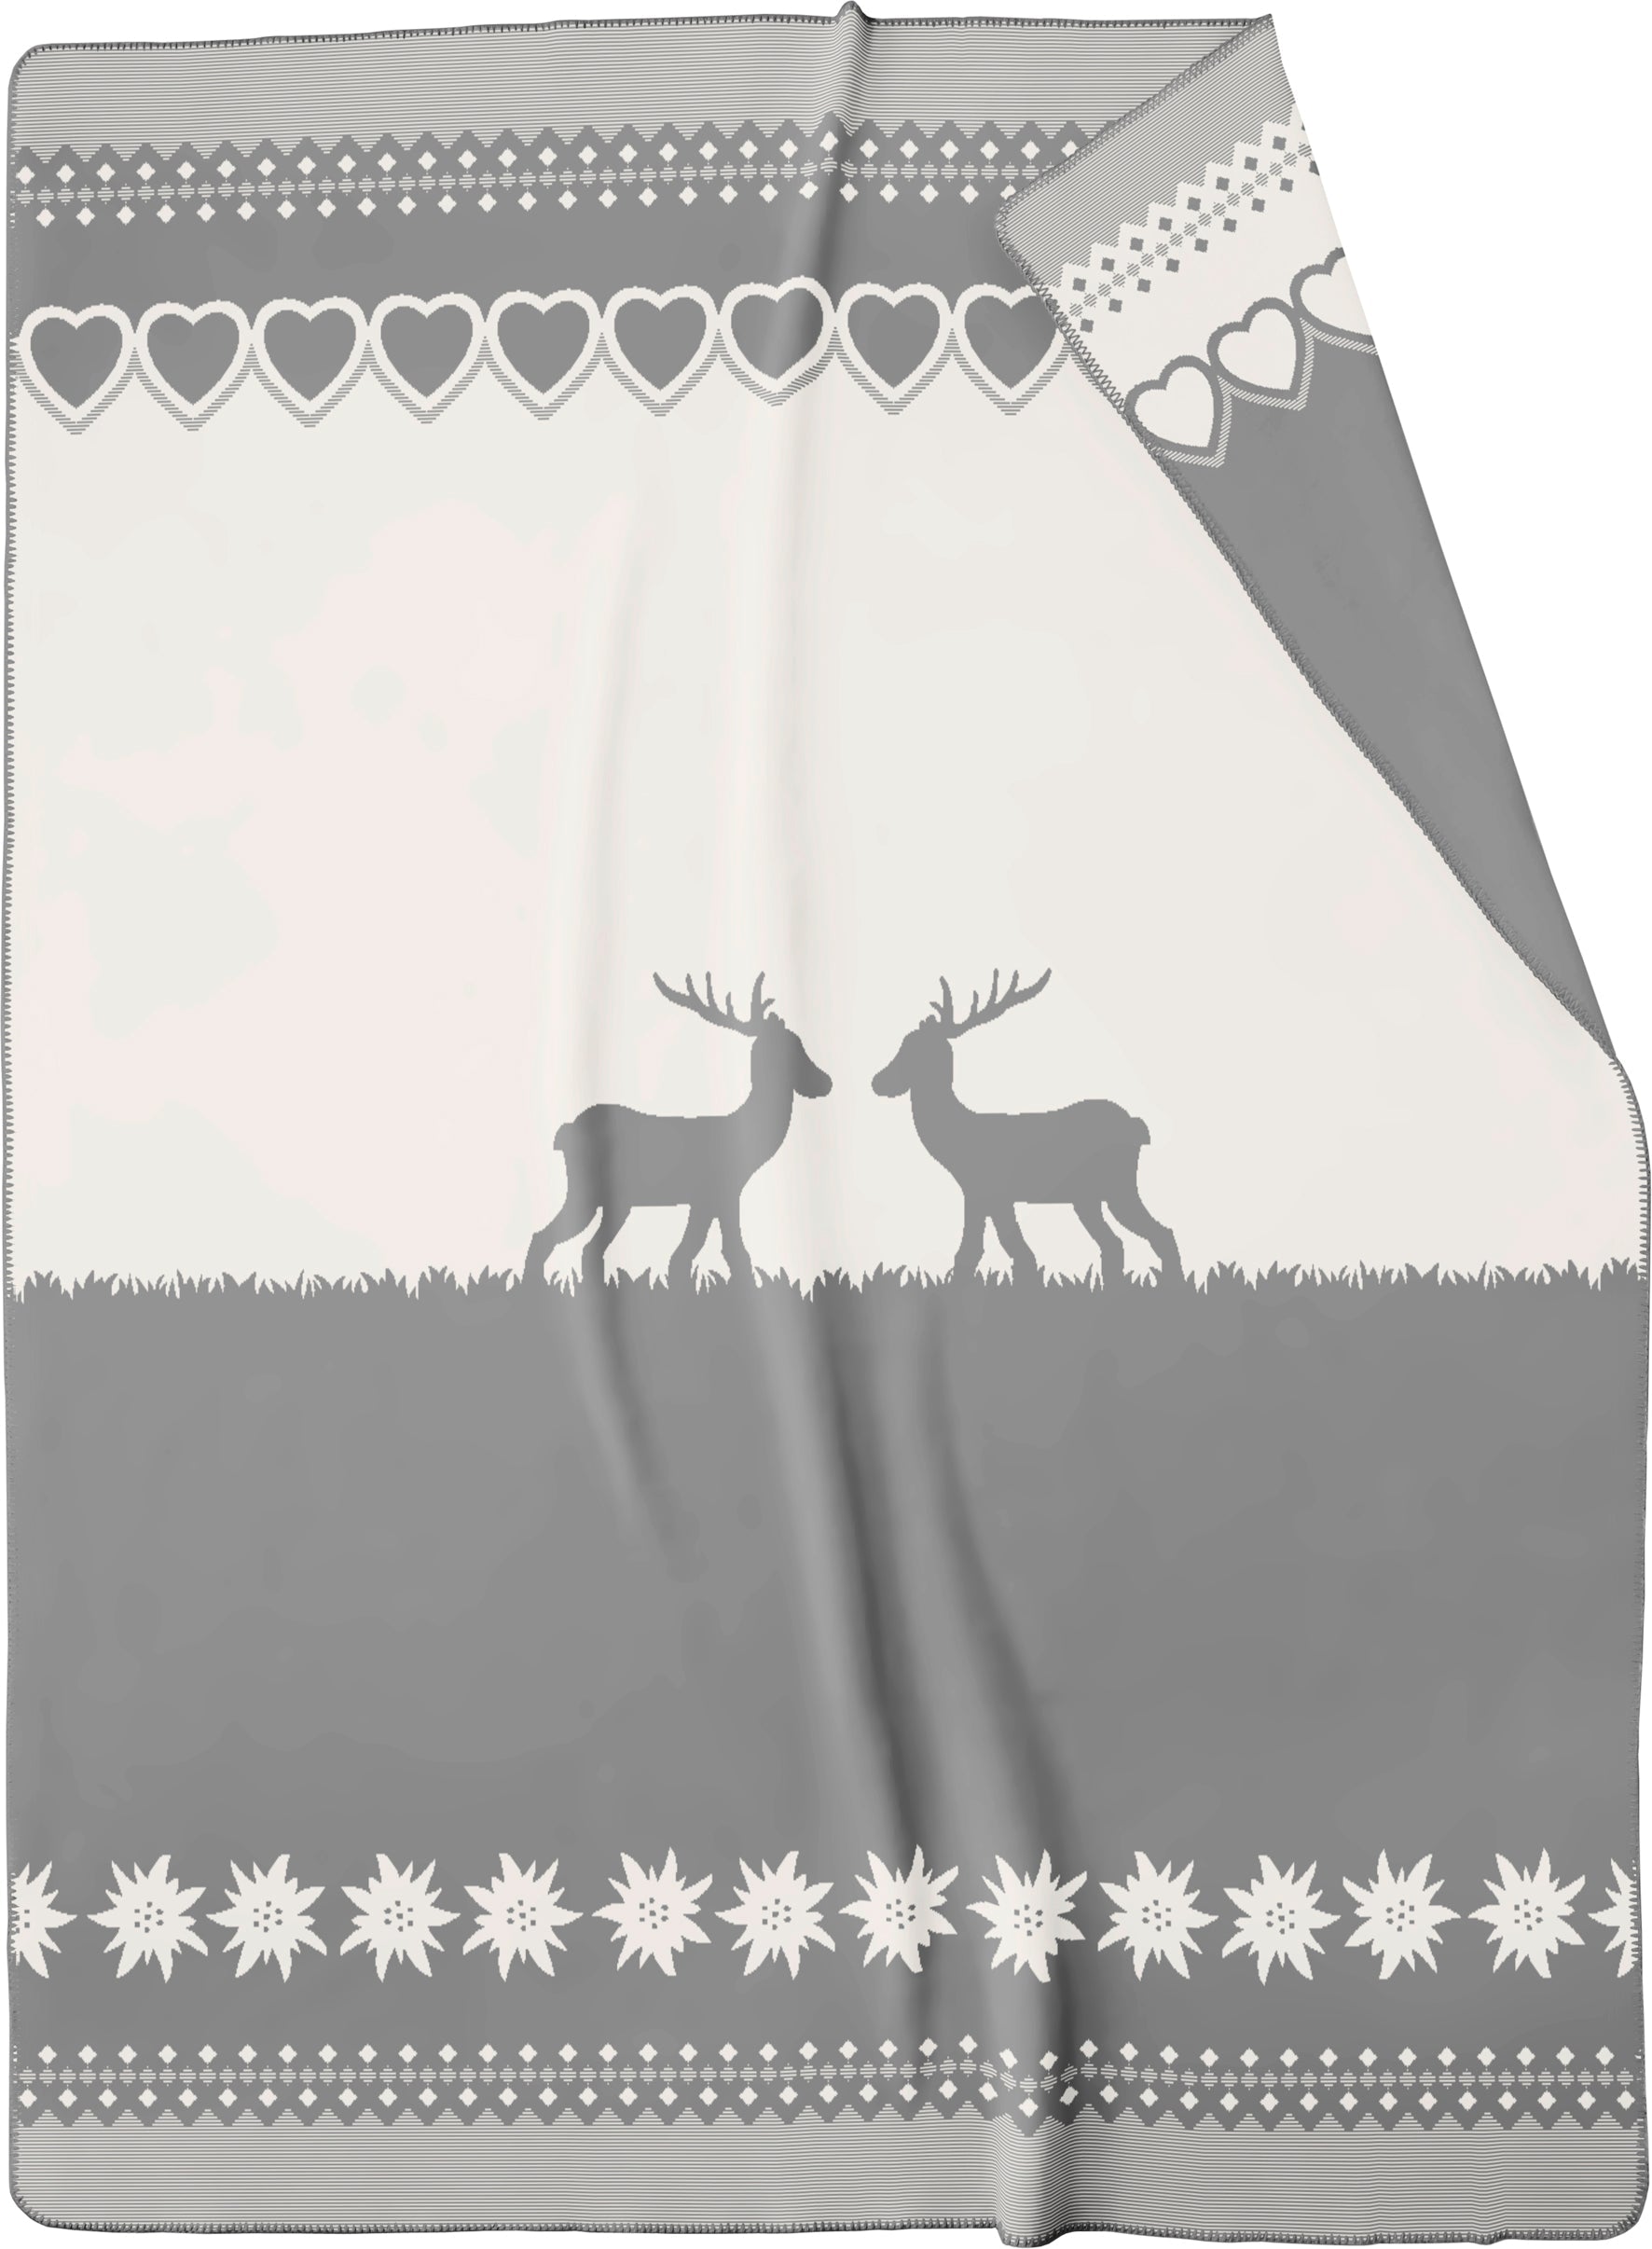 White and grey heart, flower and geometric patterned blanket, with two deers standing nose to nose in the centre of the blanket. Colour & pattern alternates on the reverse side of the blanket